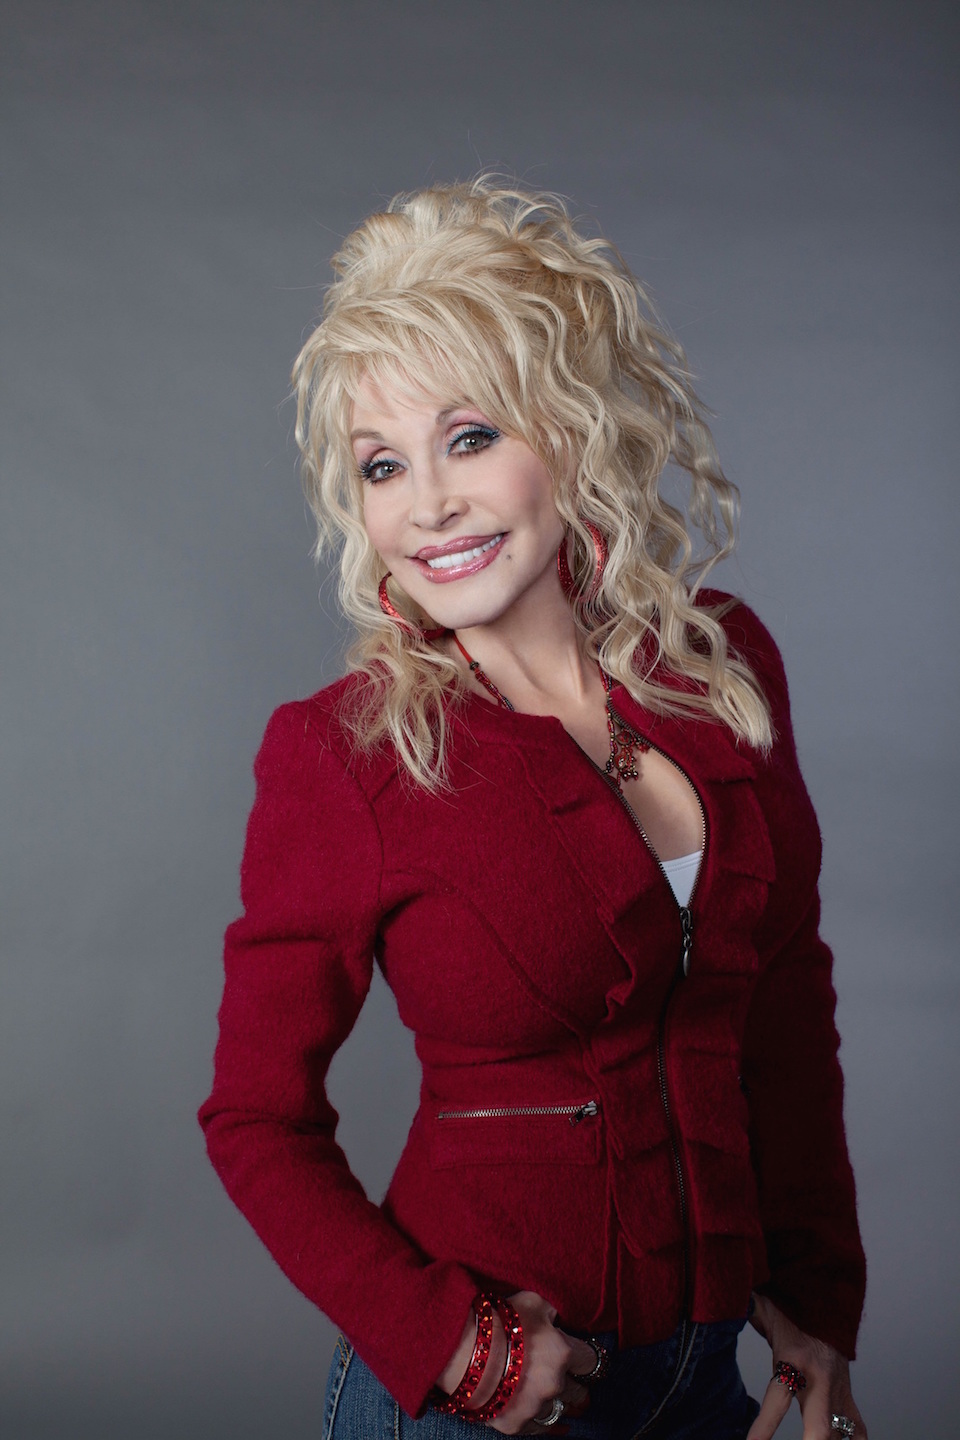 Dolly Parton performs June 12 at Artpark in Lewiston.